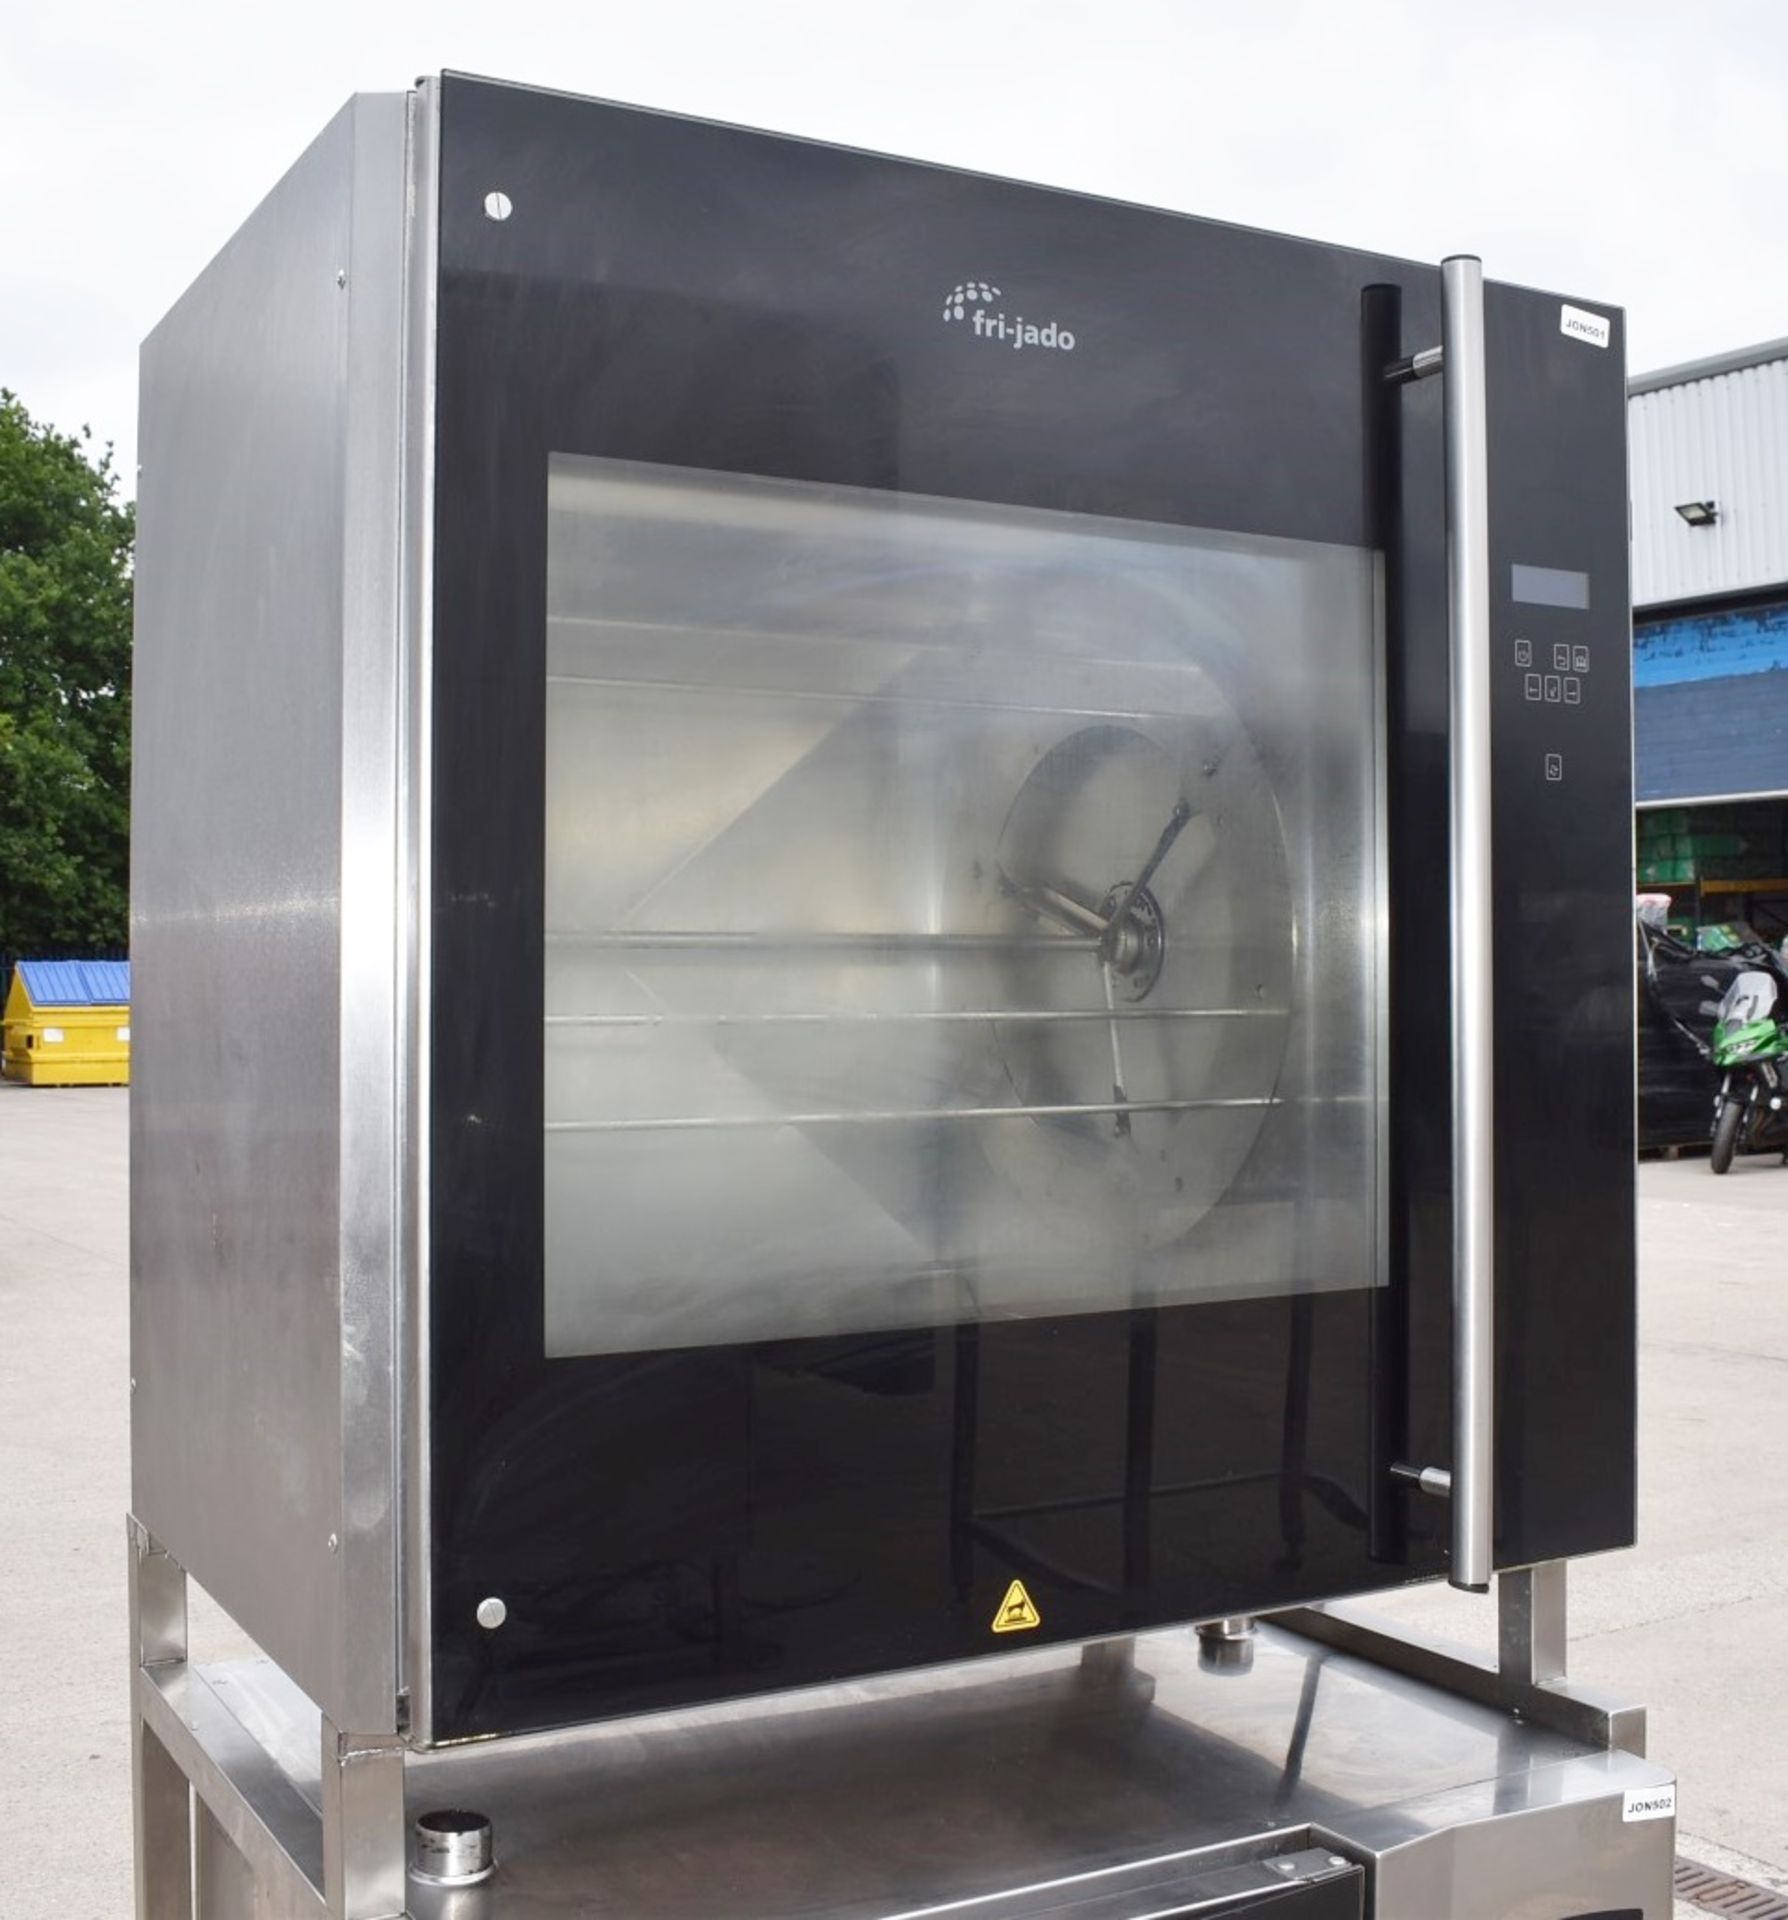 1 x Houno Electric Combi Oven and Fri-jado Rotisserie Oven Combo With Stand - 3 Phase - Image 13 of 22